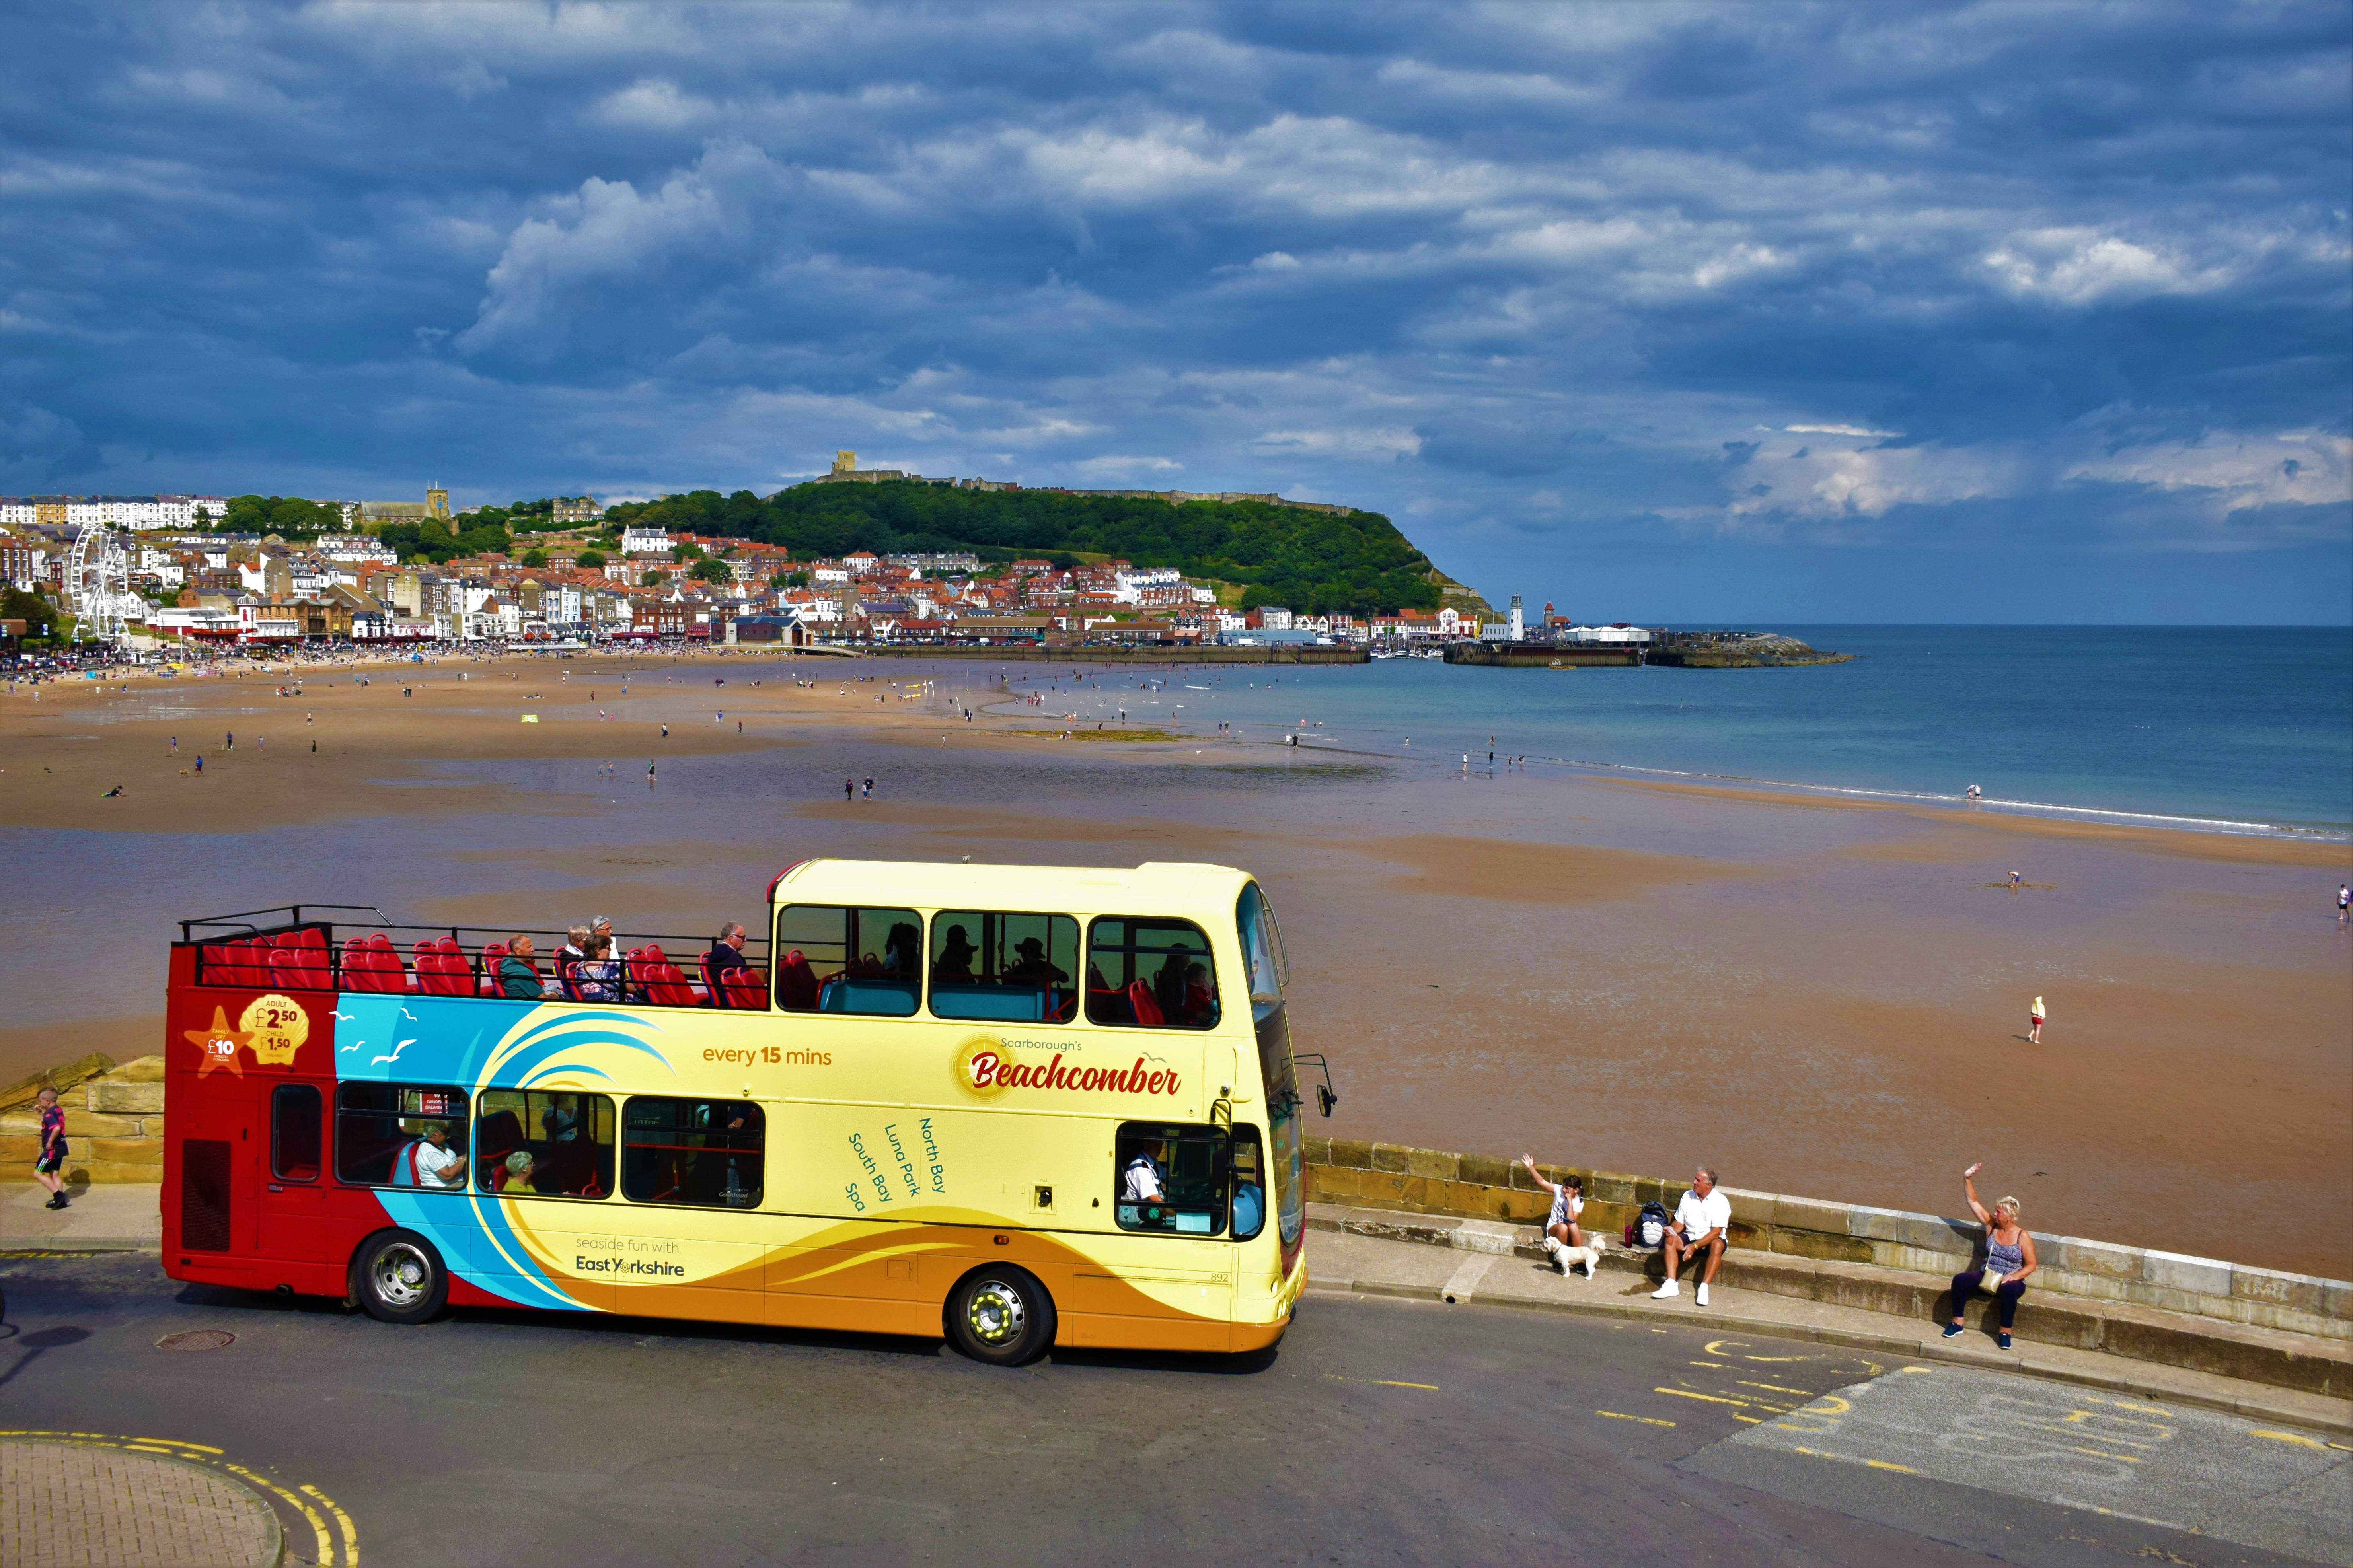 Open top bus at the seaside in Scarborough